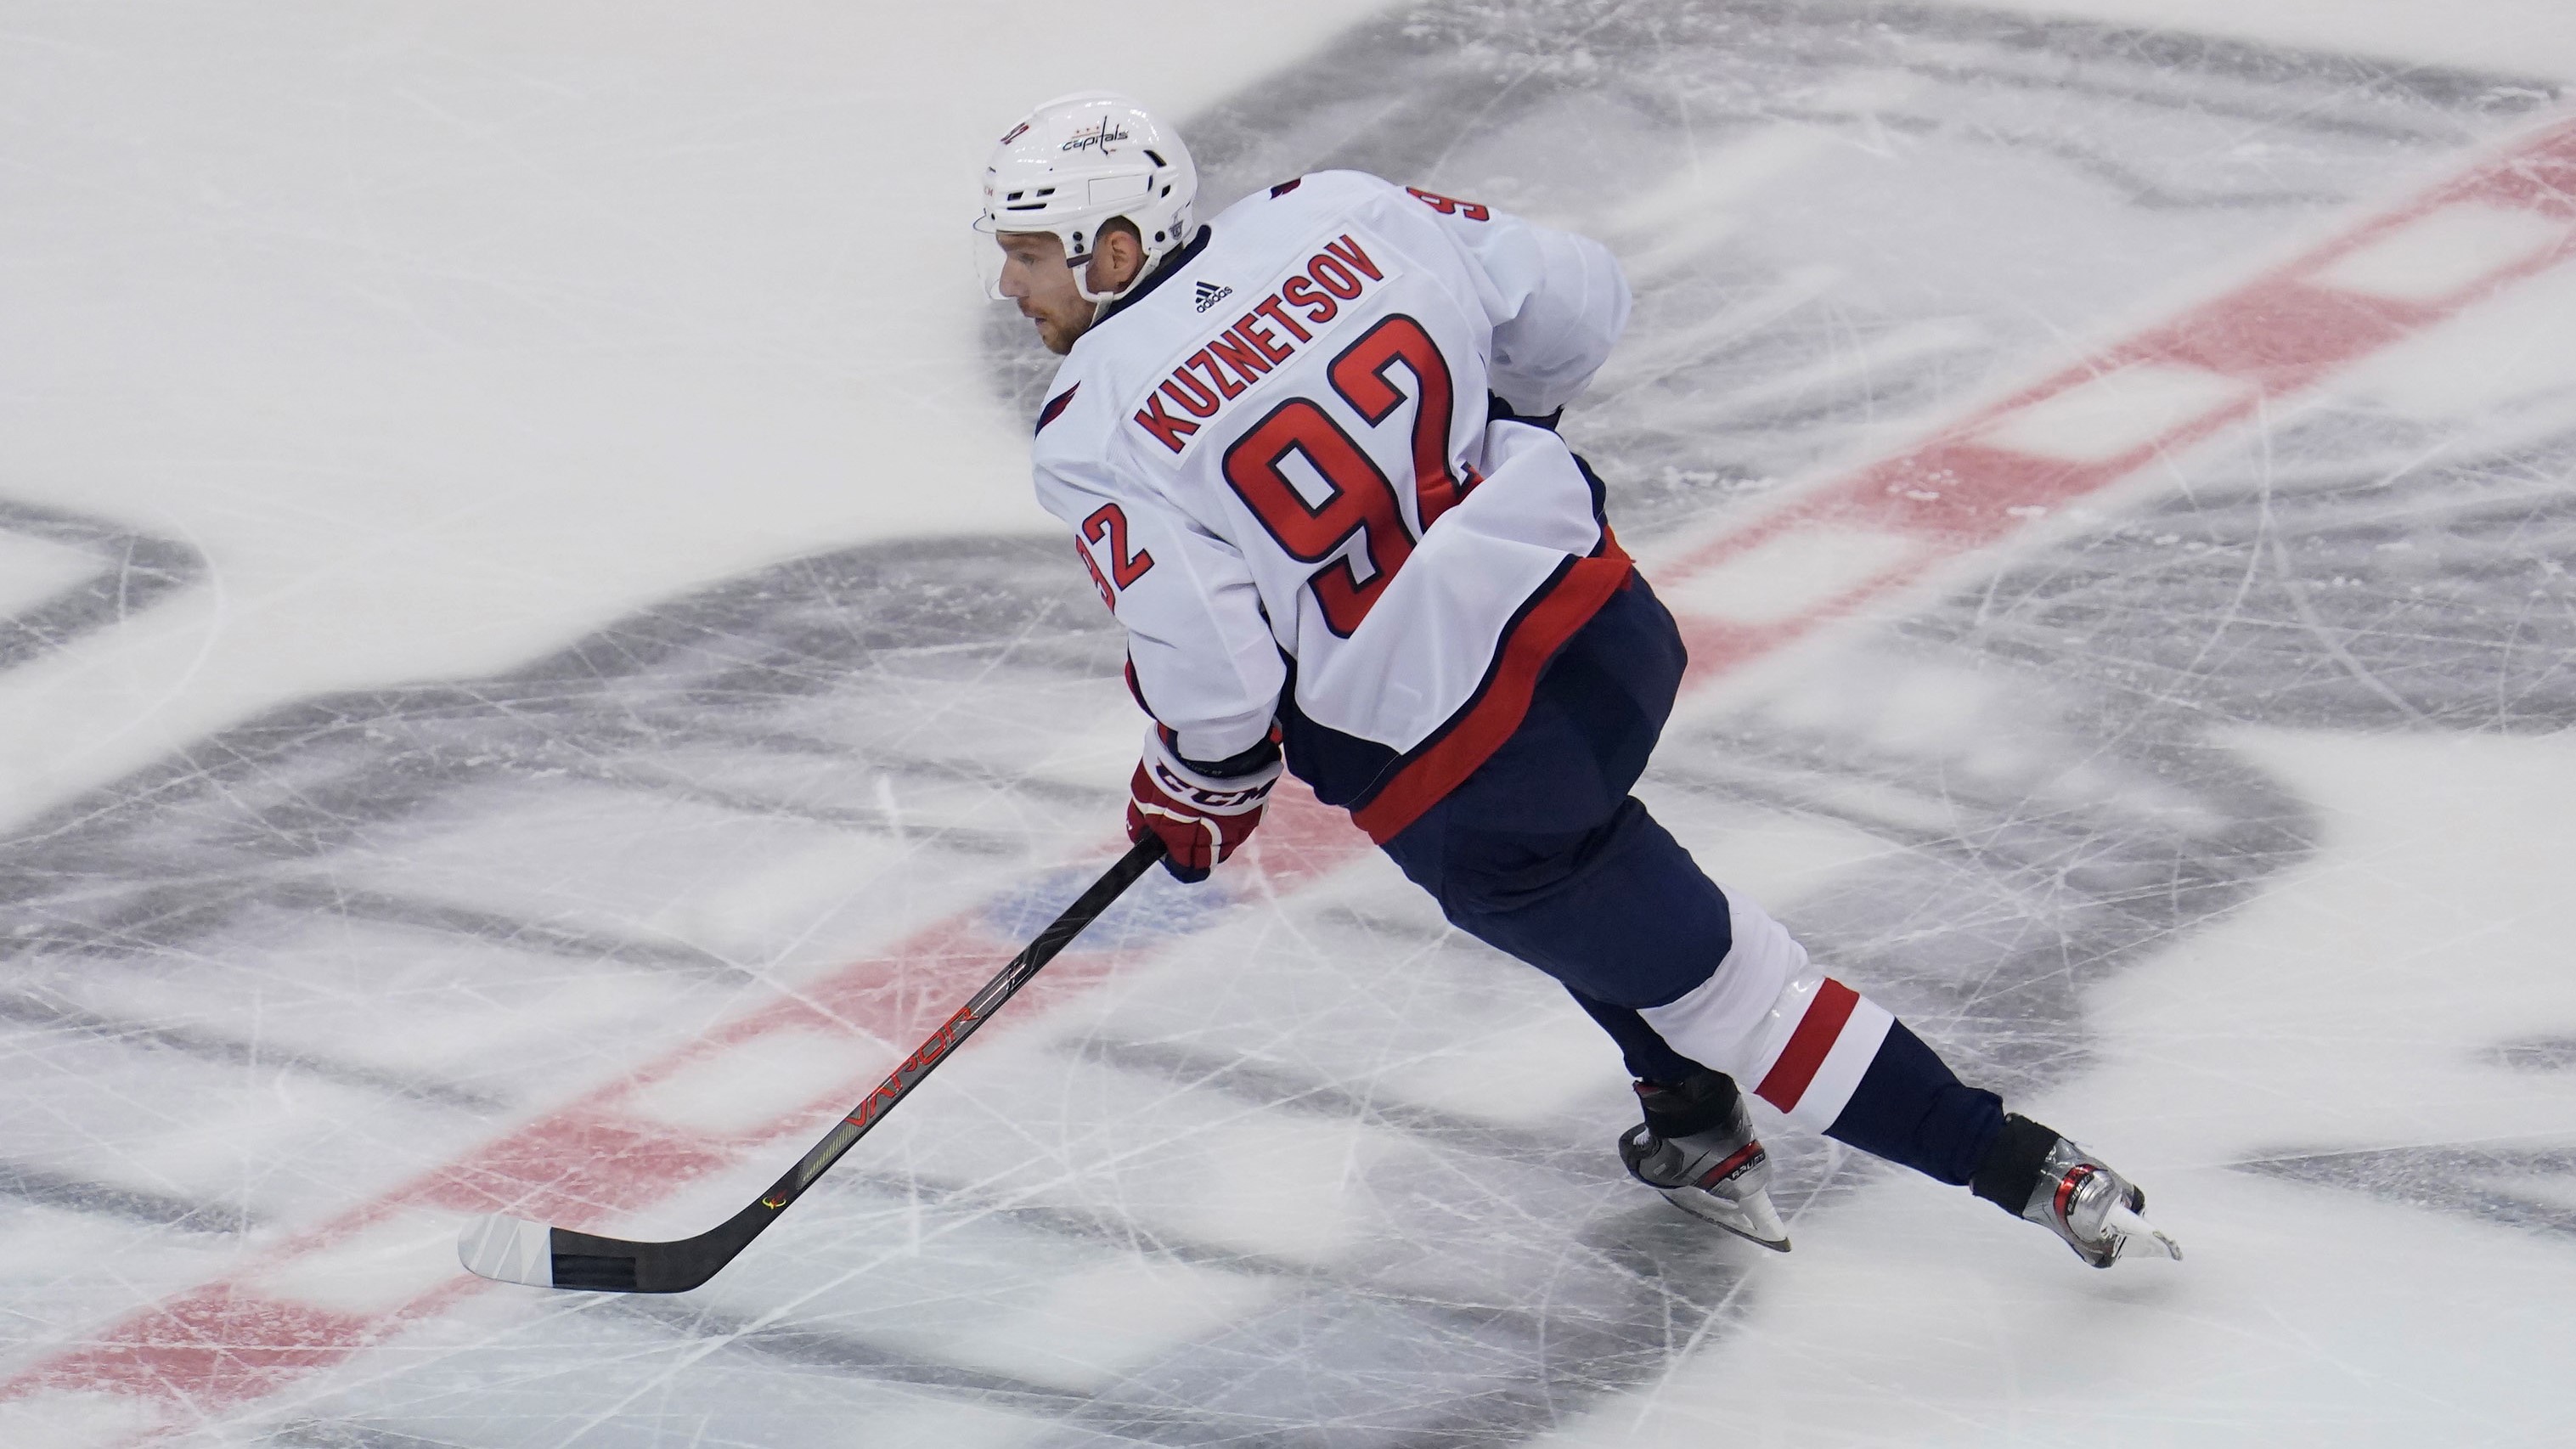 Evgeny Kuznetsov's practice participation an encouraging sign for Capitals  - NBC Sports